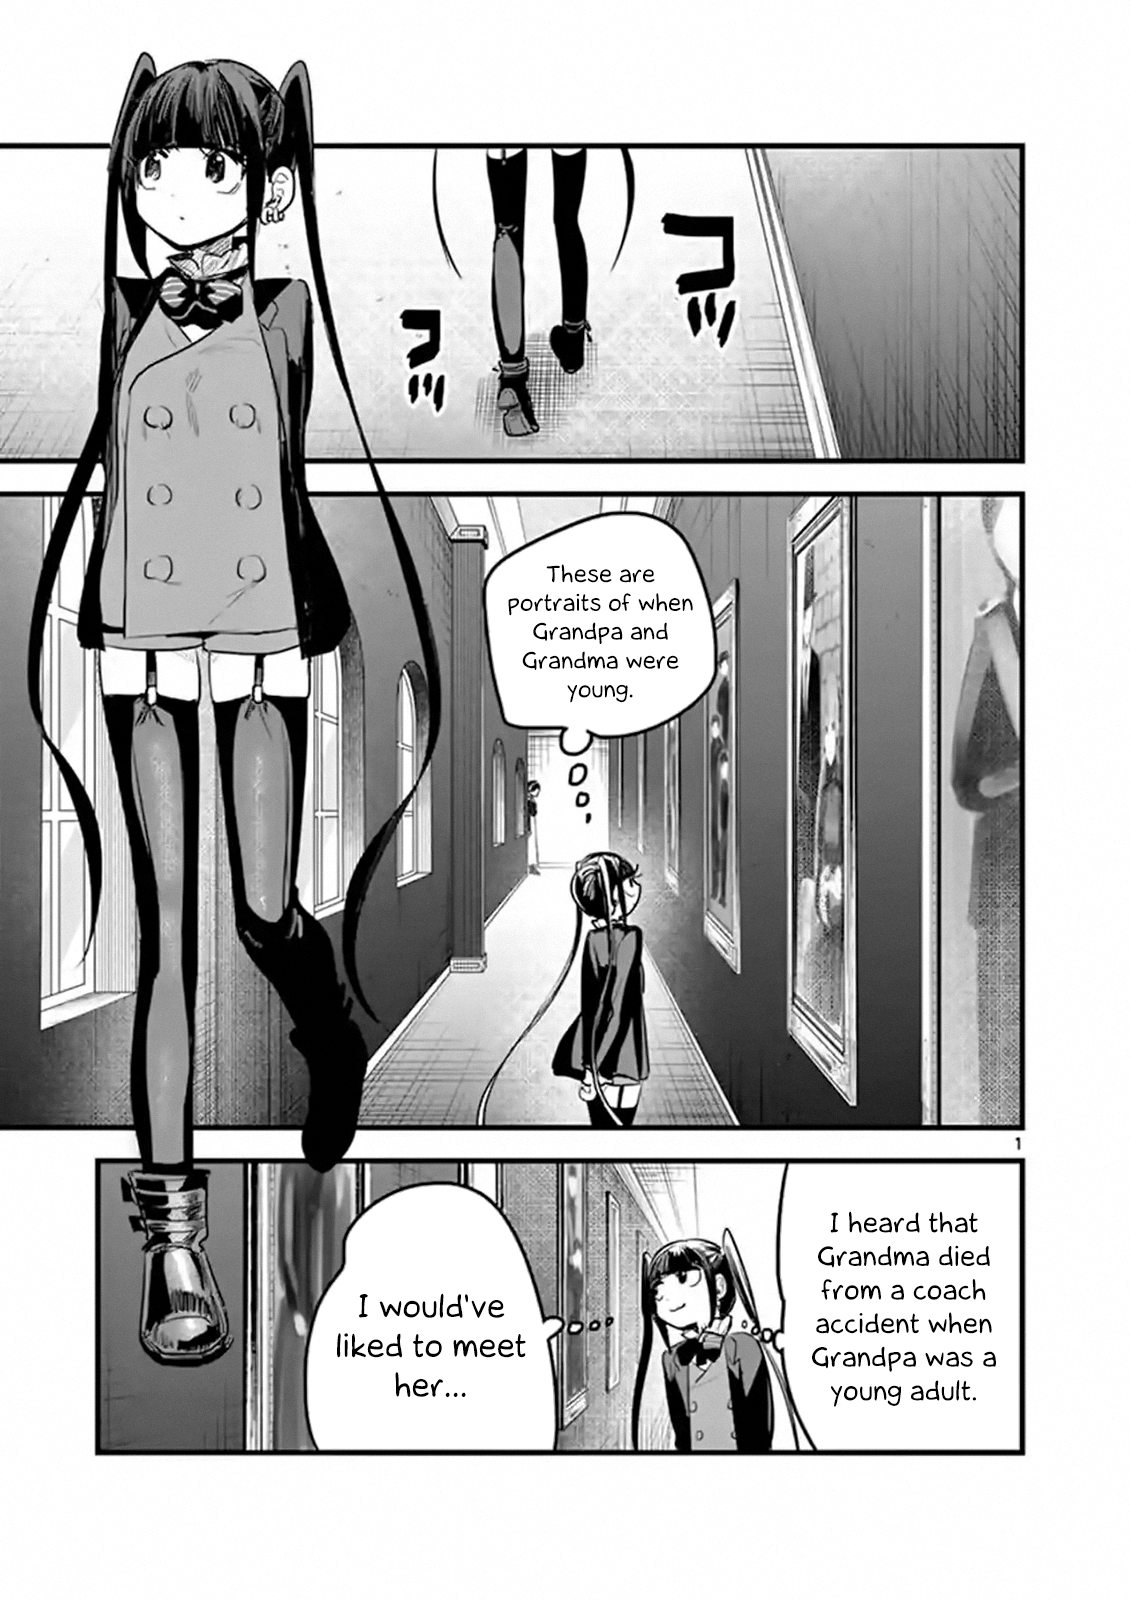 The Duke Of Death And His Black Maid - Page 1